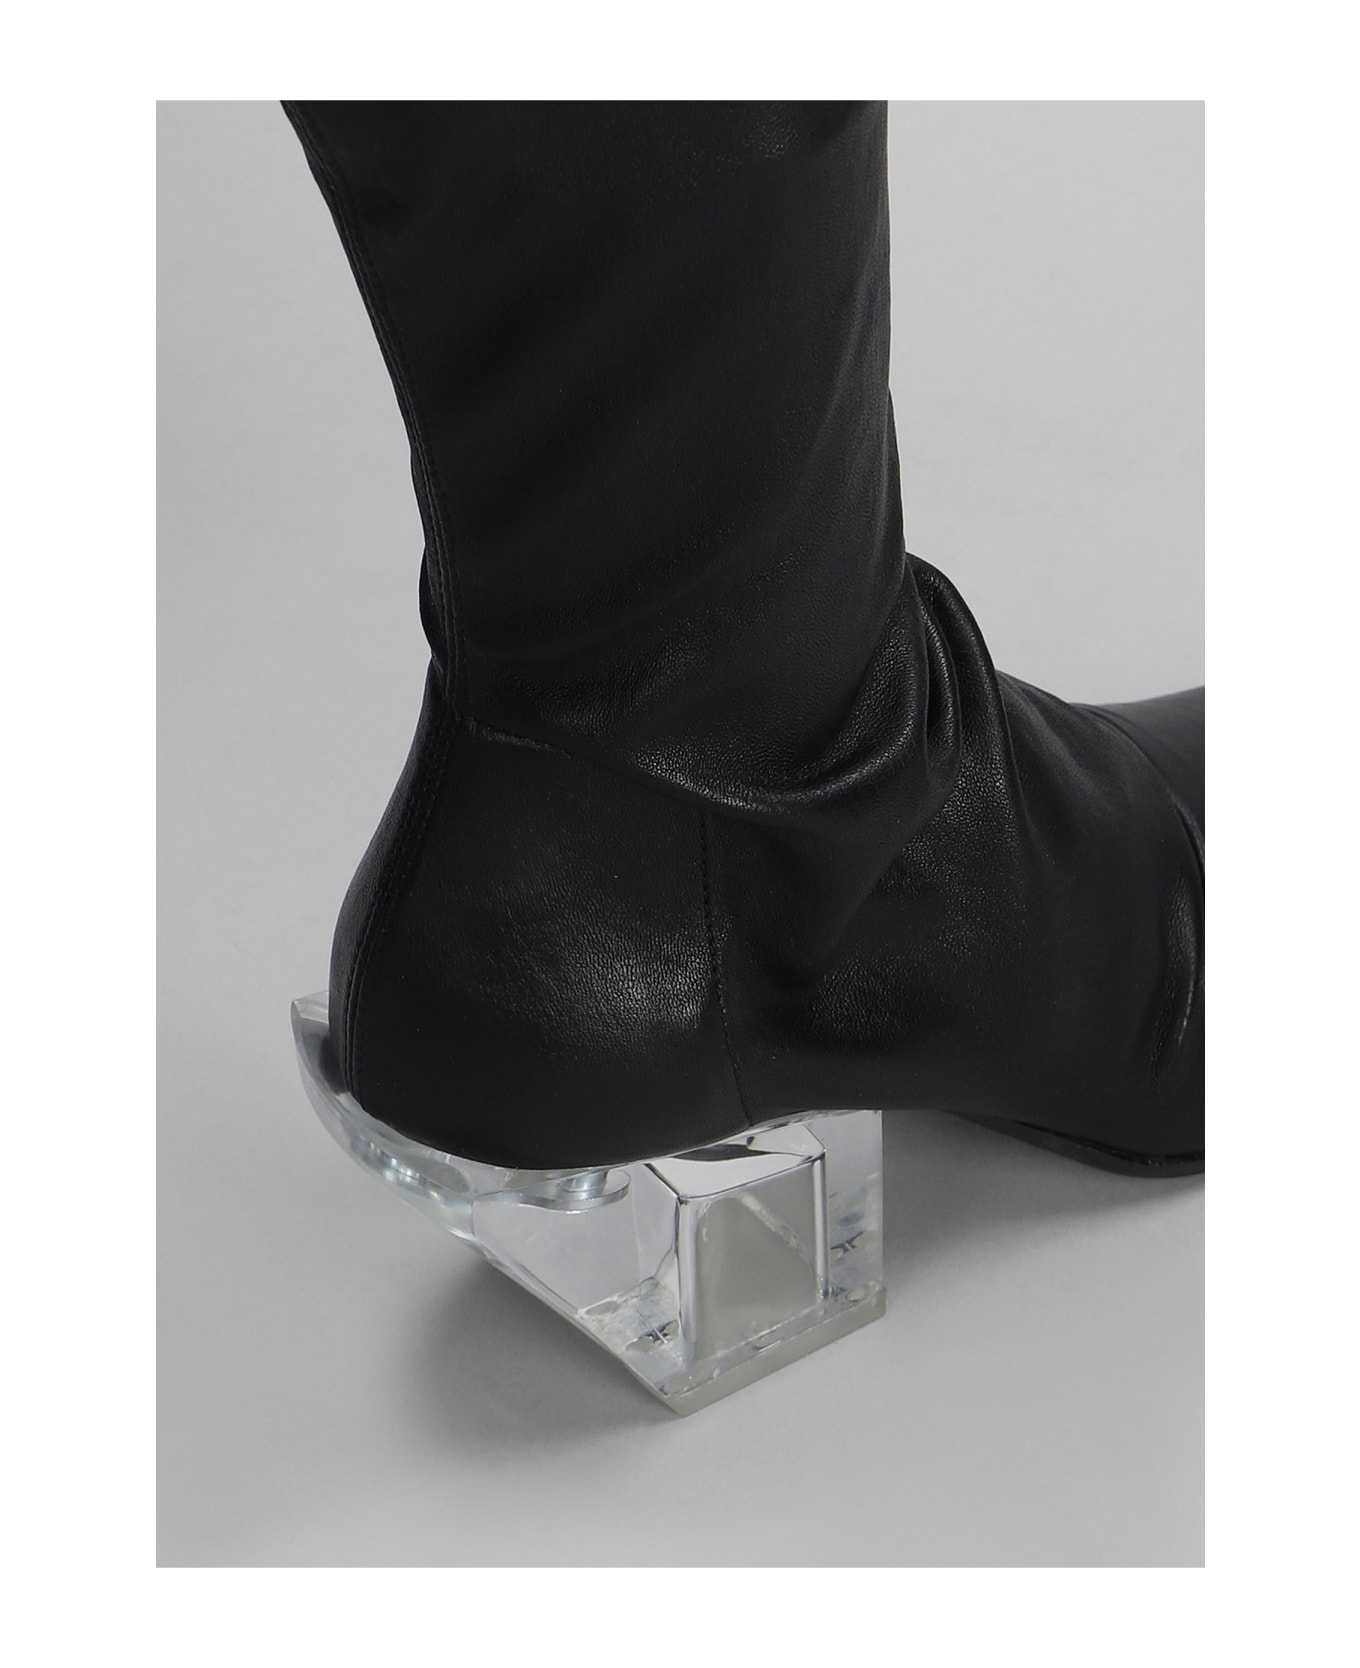 Rick Owens Leather Boot - BLACK